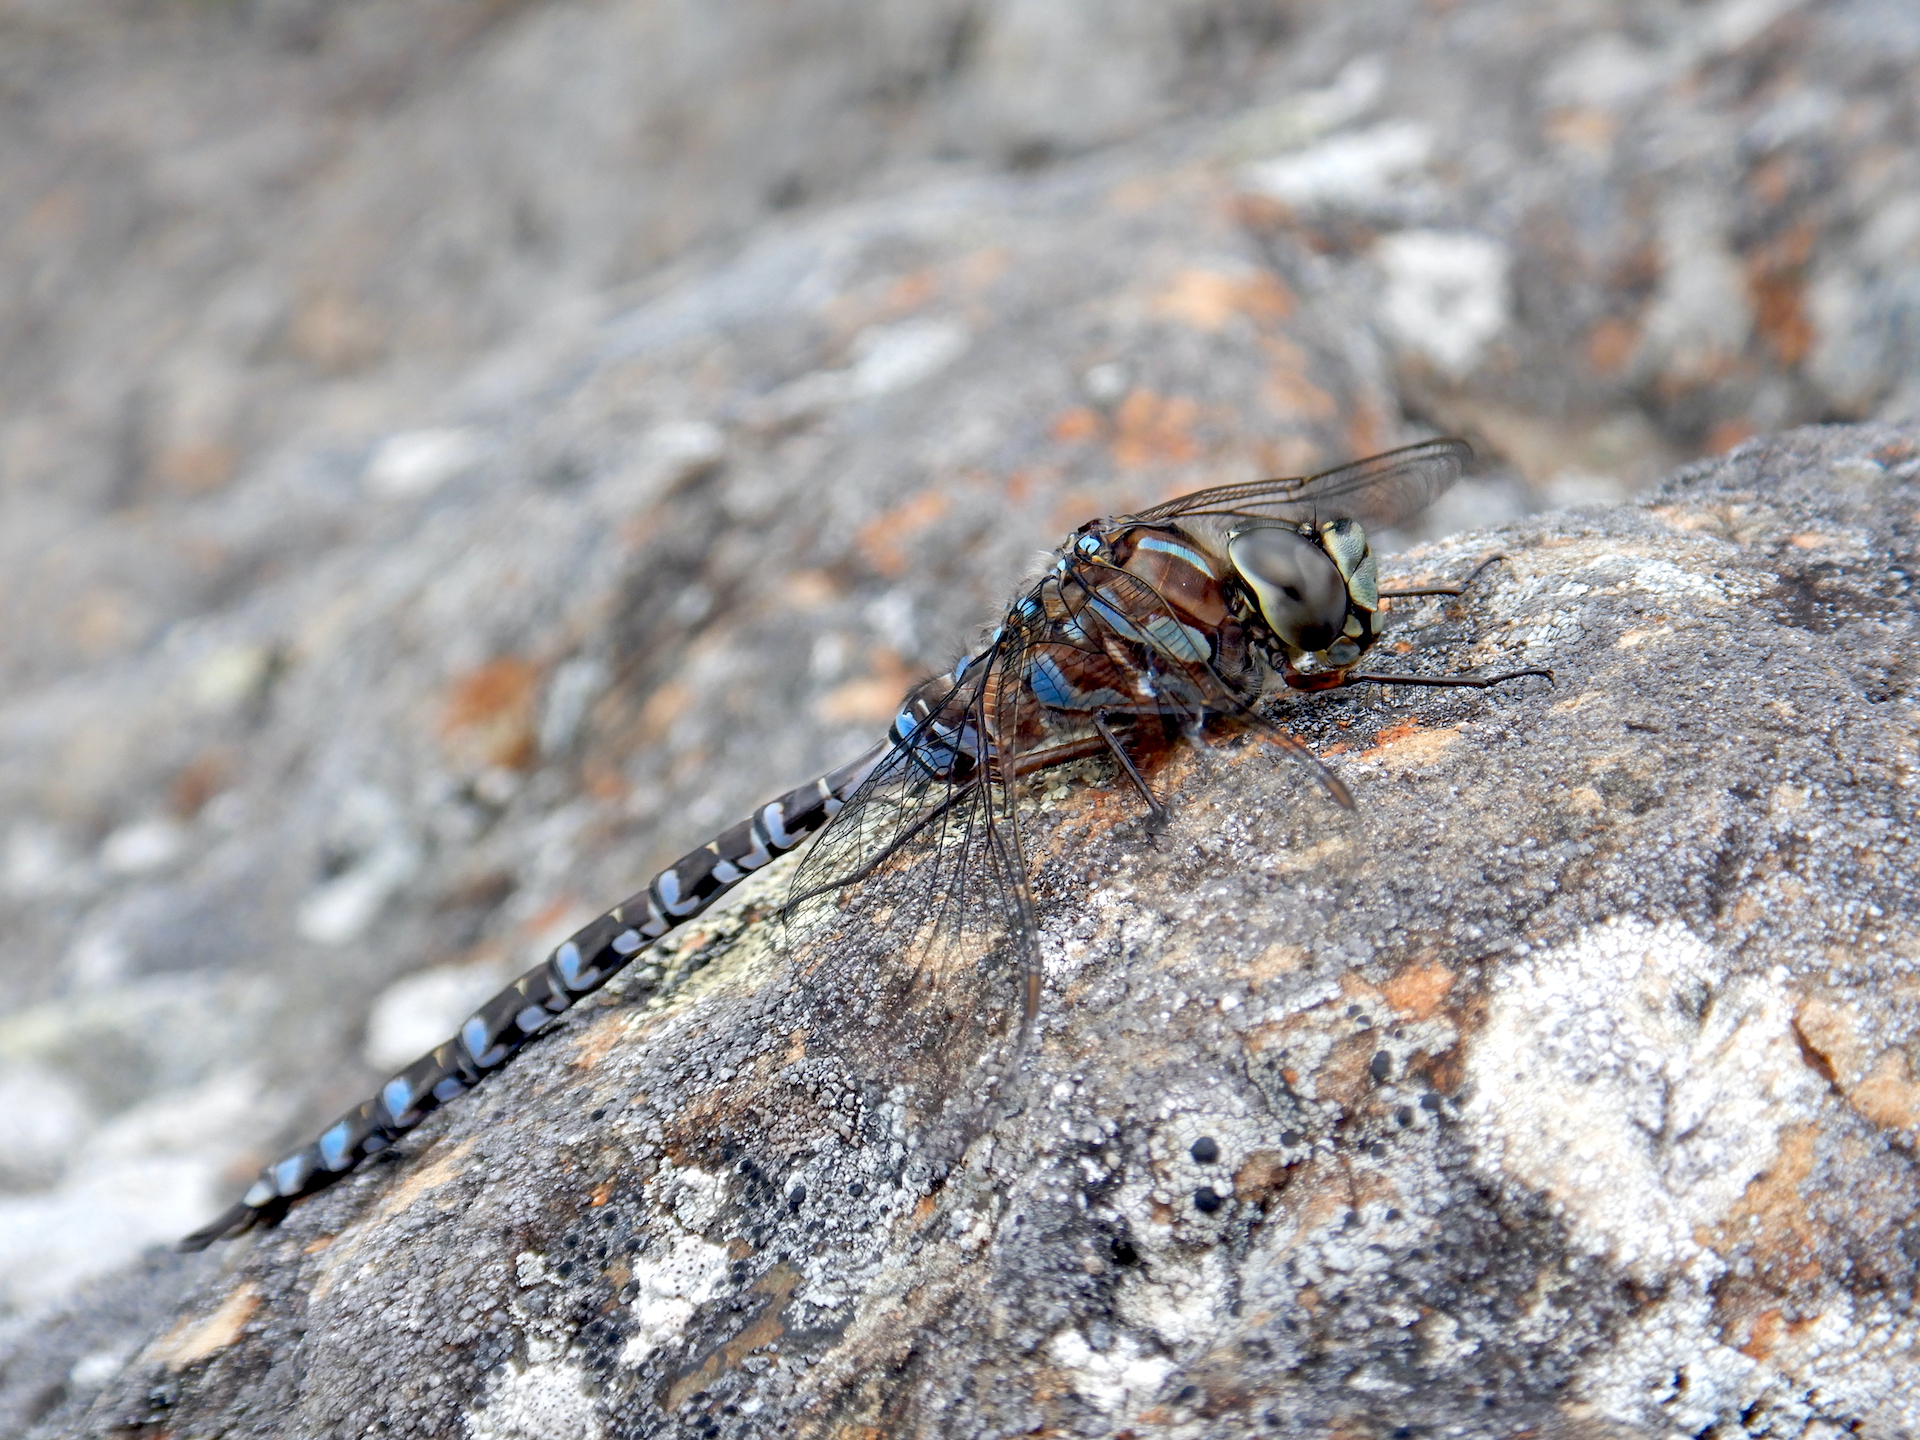 Close up view of a dragonfly. The insect rests on rock speckled with small crusty lichens. It has a blue-spotted abdomen and holds its wings flat parallel with the rock.